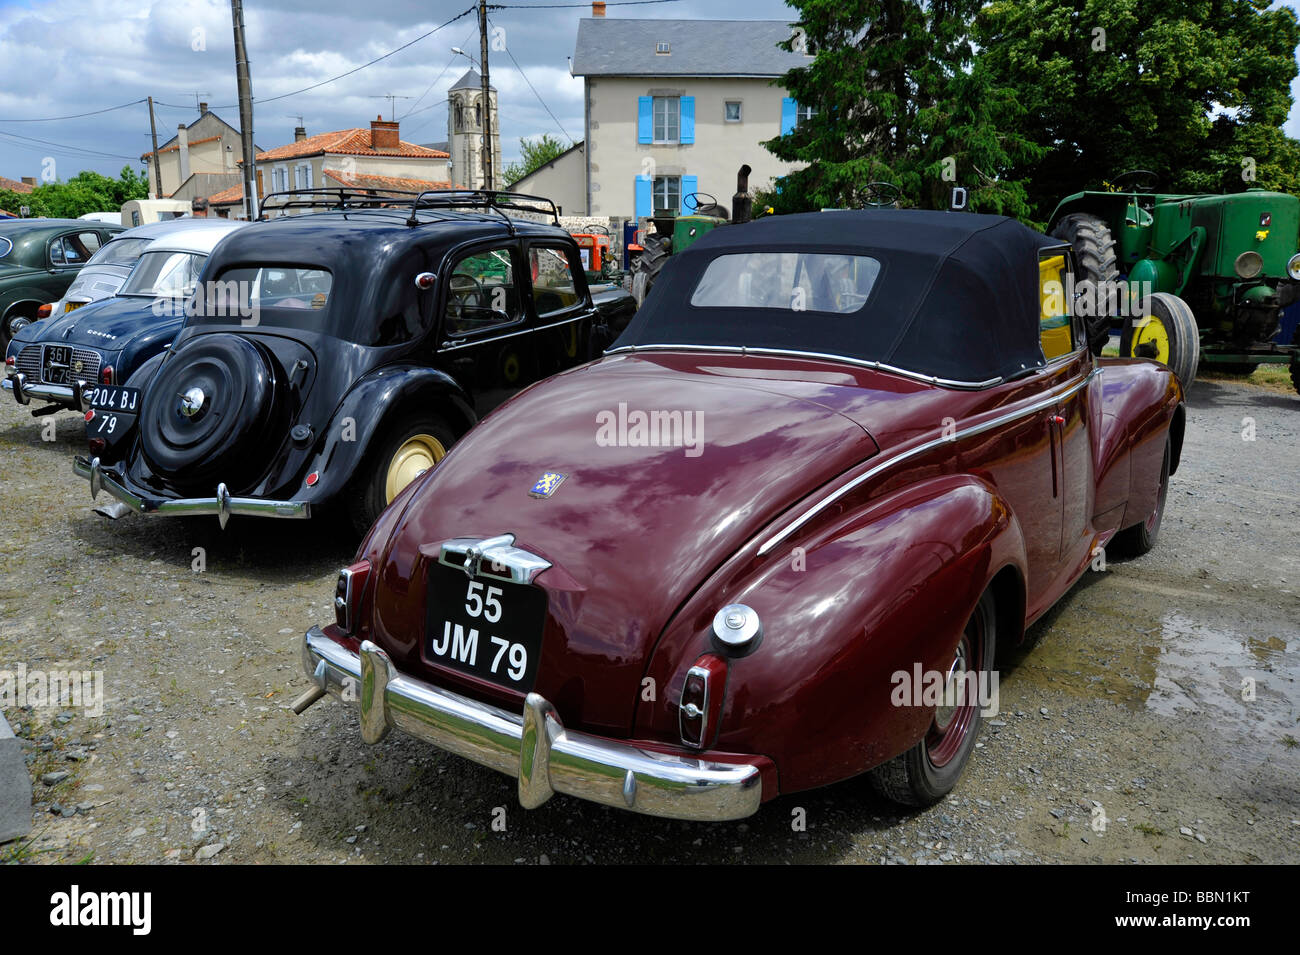 Old Classic French Peugeot 203 Convertible Two Door Automobile Car Stock Photo